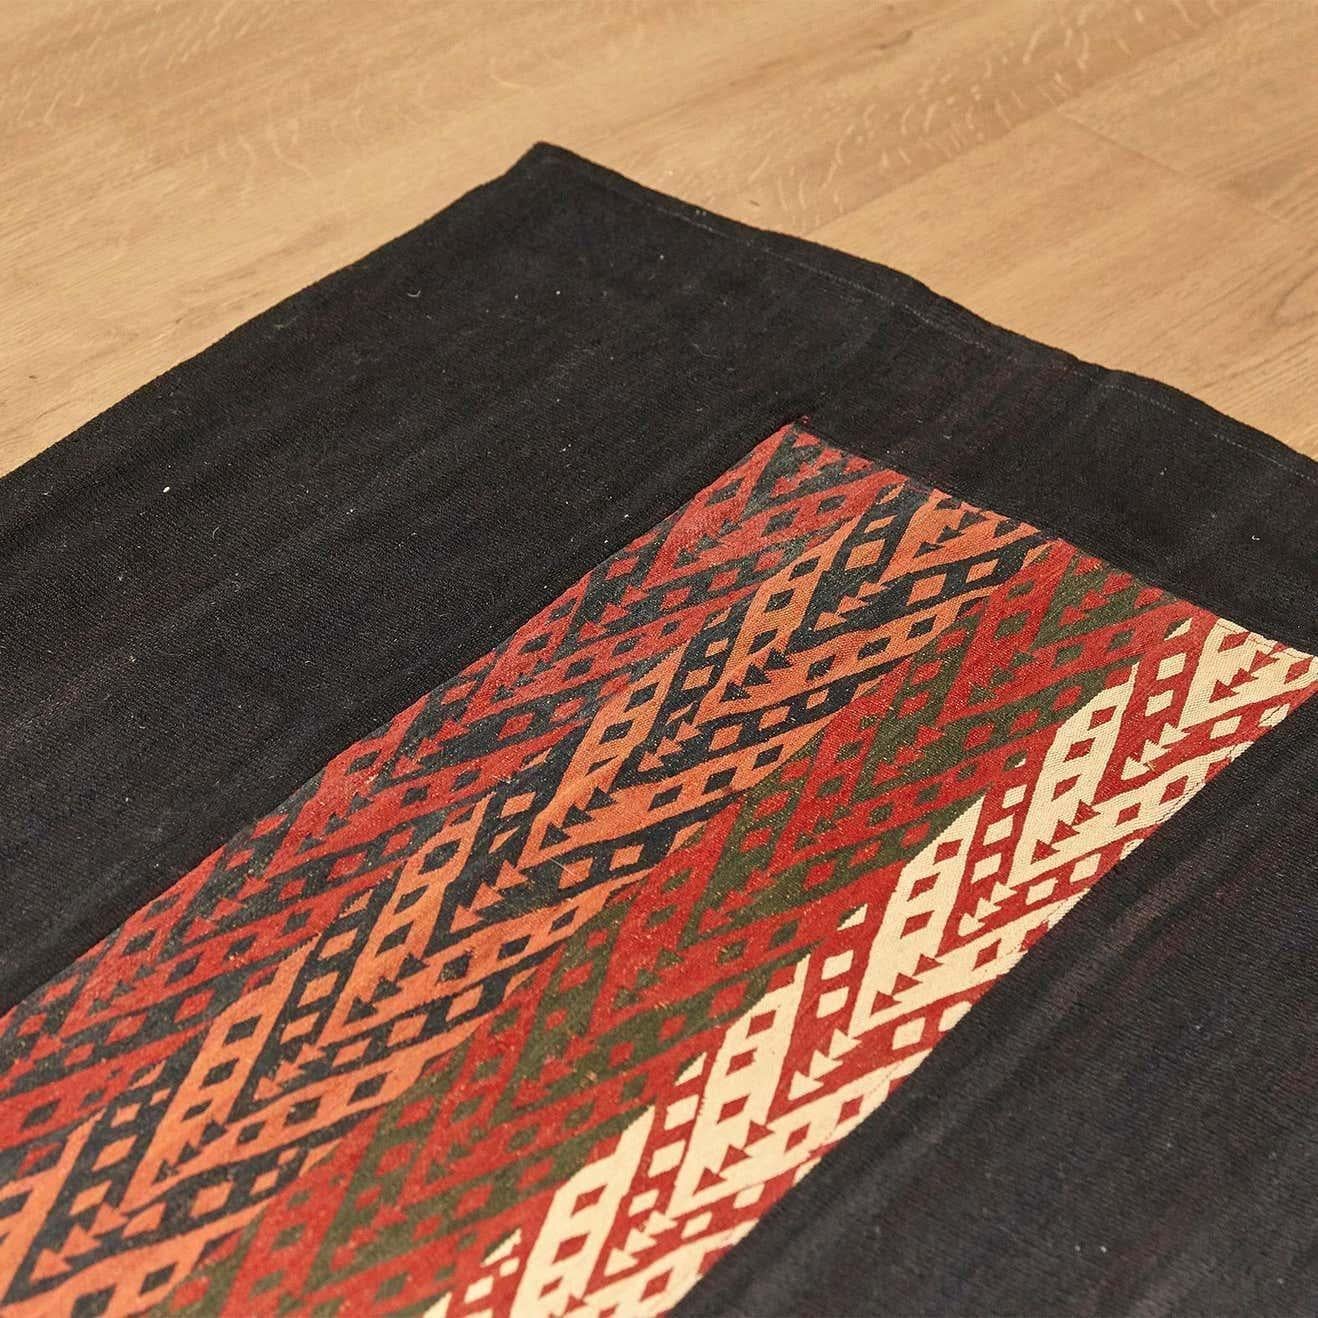 Van Turkey Hand Knotted Wool Red Green Blue Black Rug In Good Condition For Sale In Barcelona, Barcelona